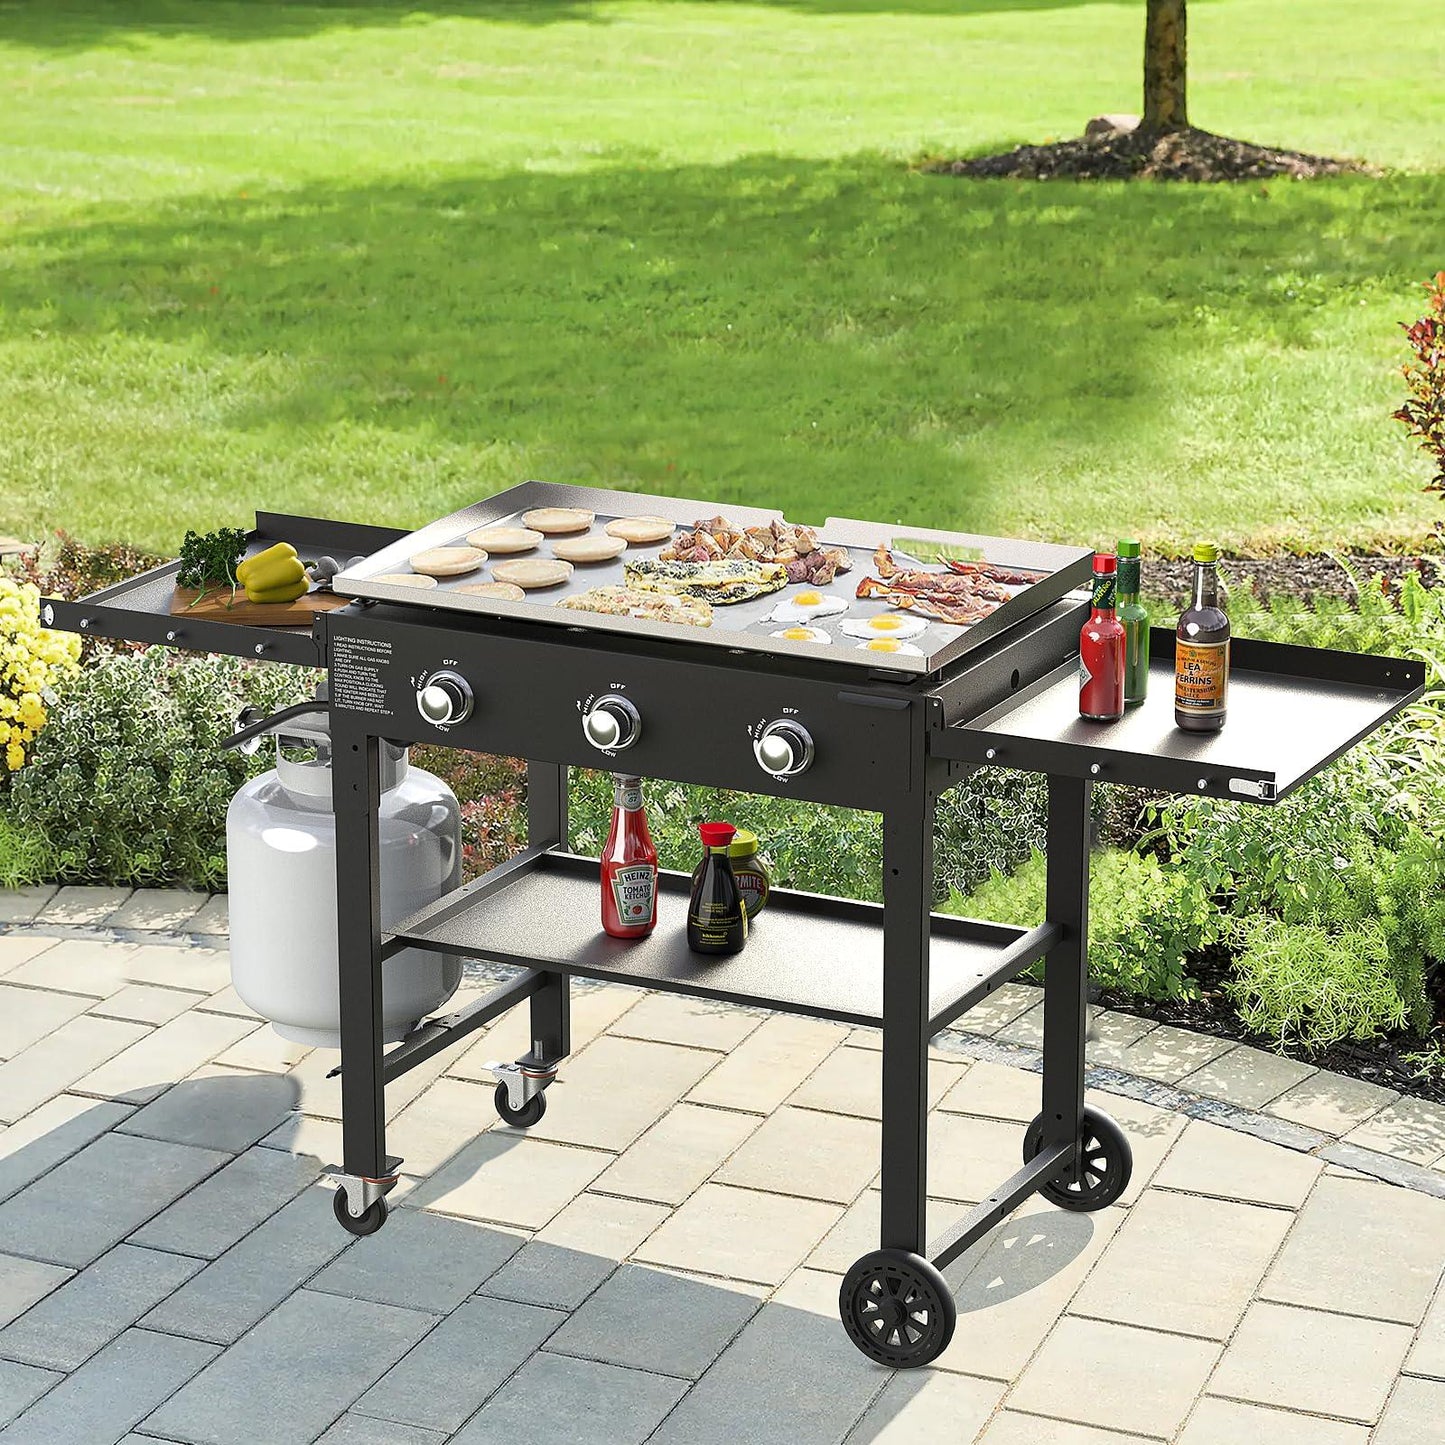 SKOK Foldable Gas Griddle-31.5 Inch Outdoor Propane Griddle, Portable Flat Top Gas Grill -45000 BTU Propane Fuelled, 3 Burners Table Top Griddle Station with Side Shelves - CookCave